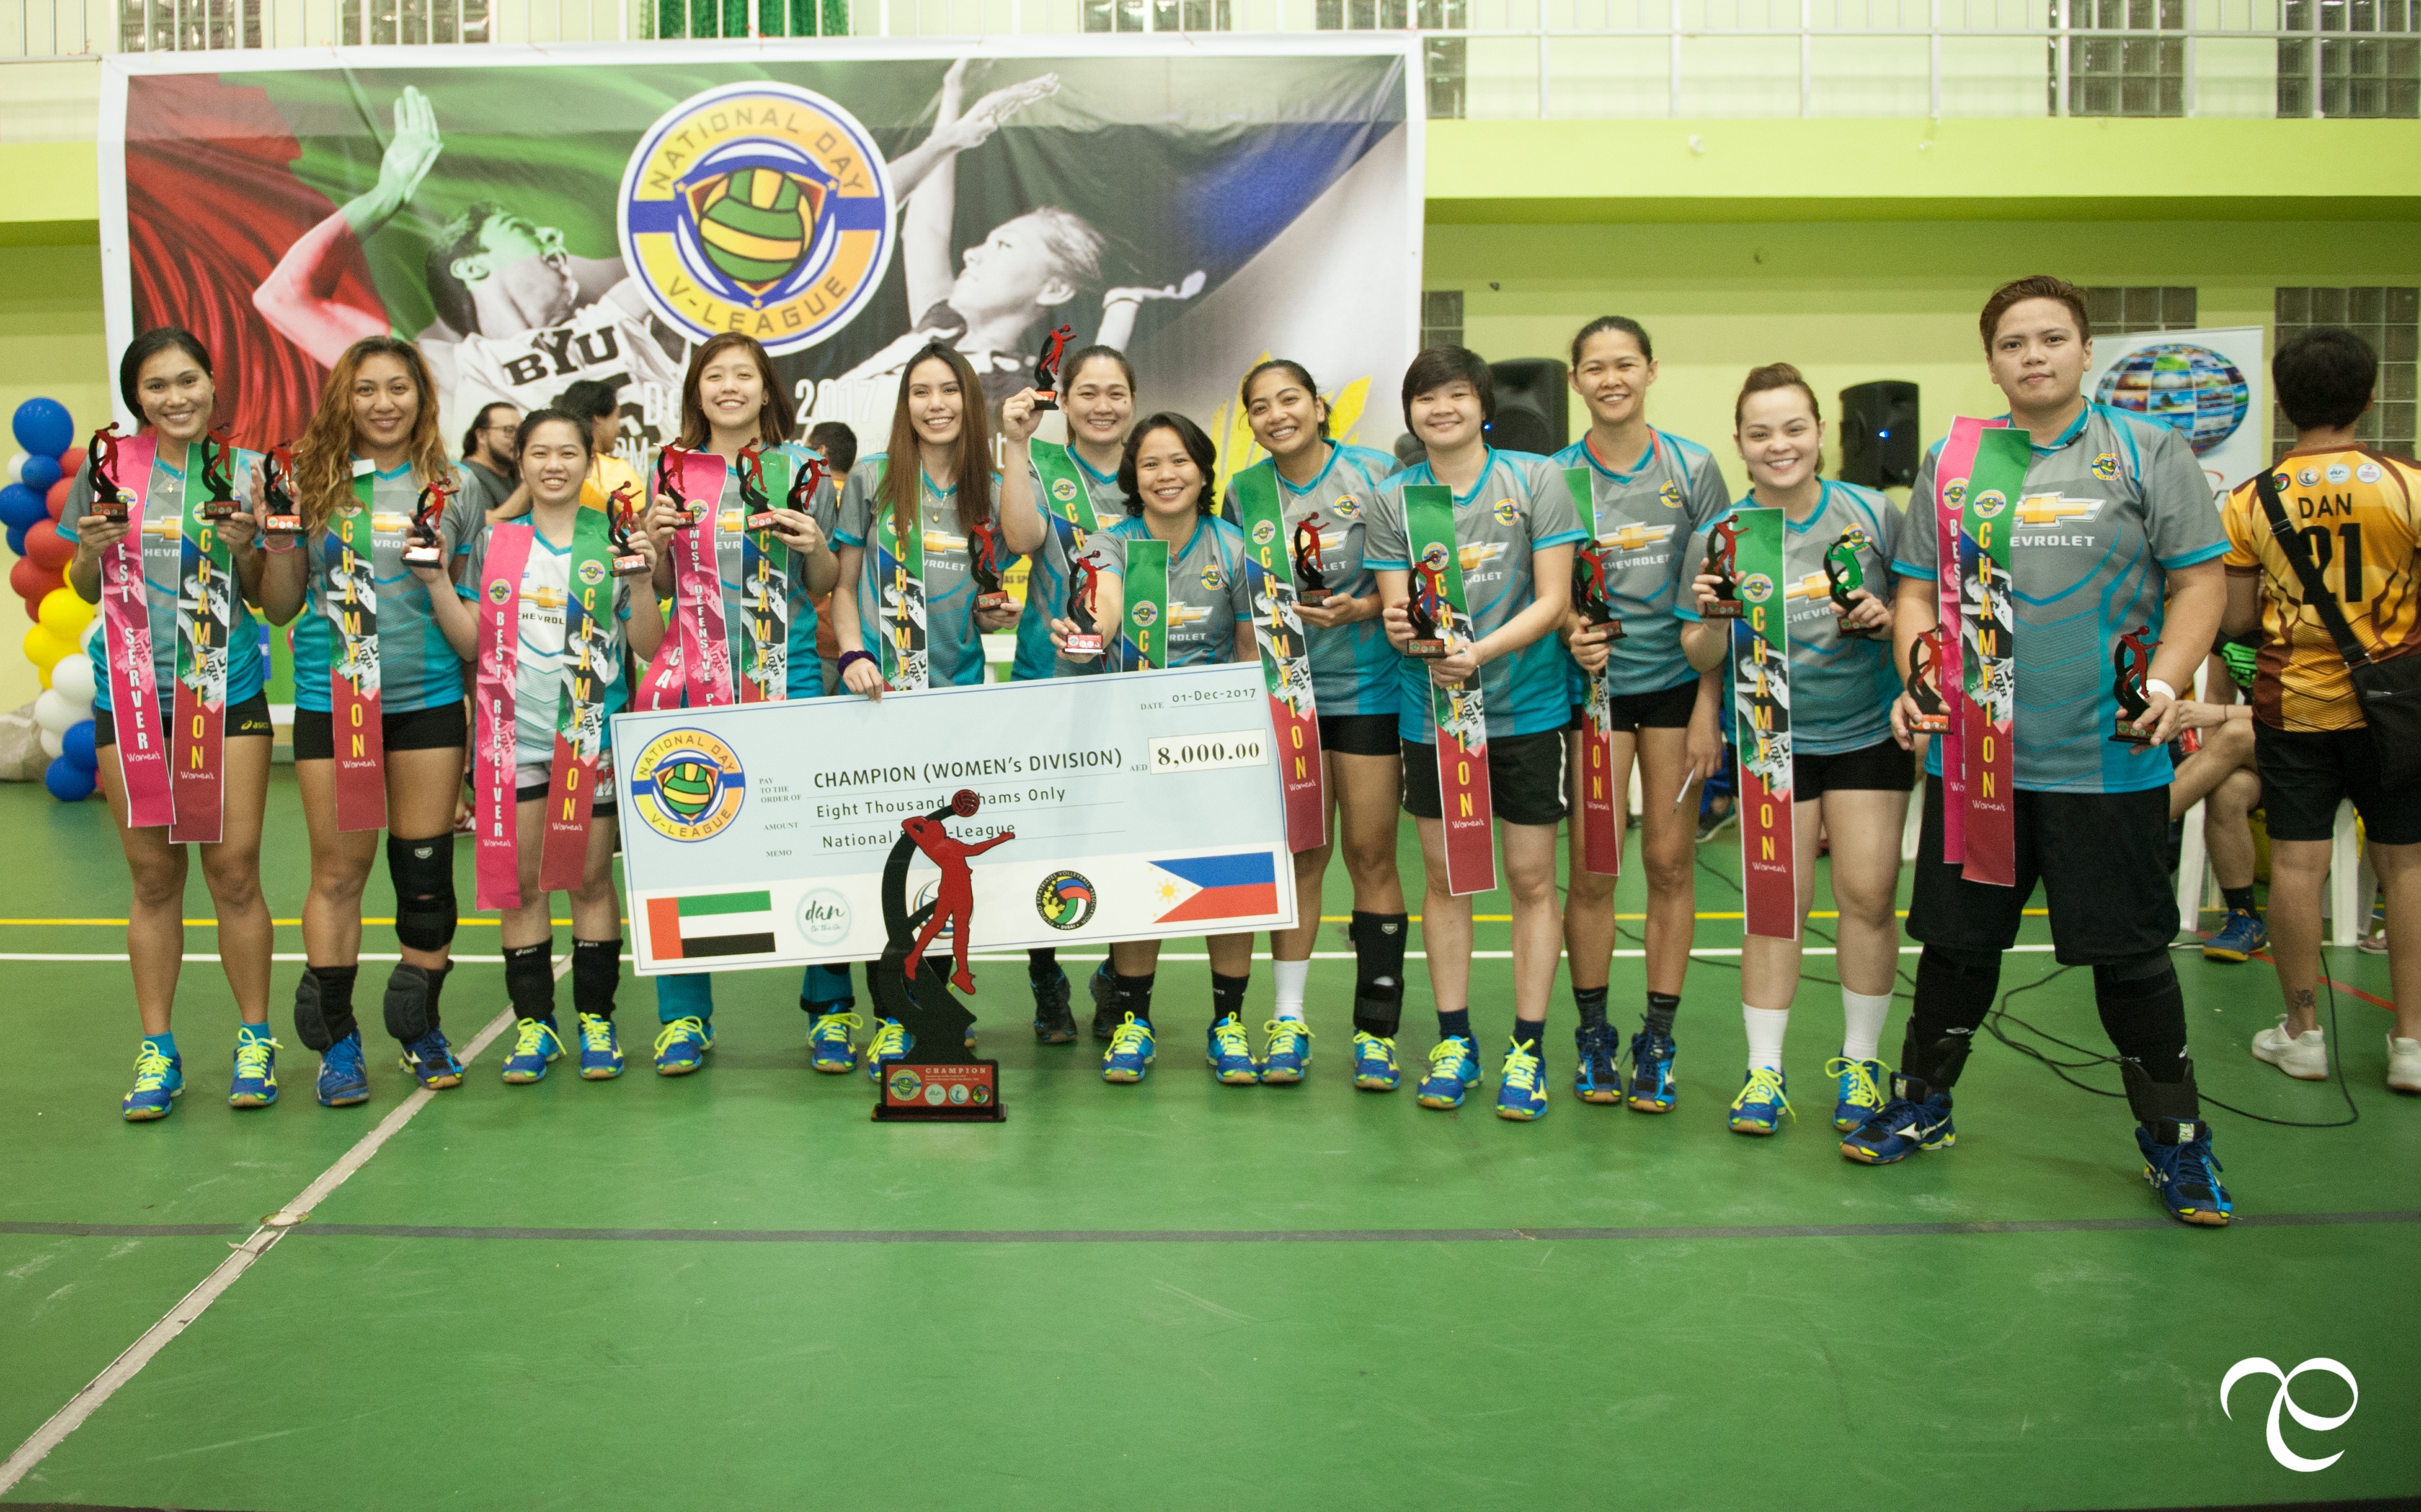 The Chevrolet Ace Spikers Womens League champs